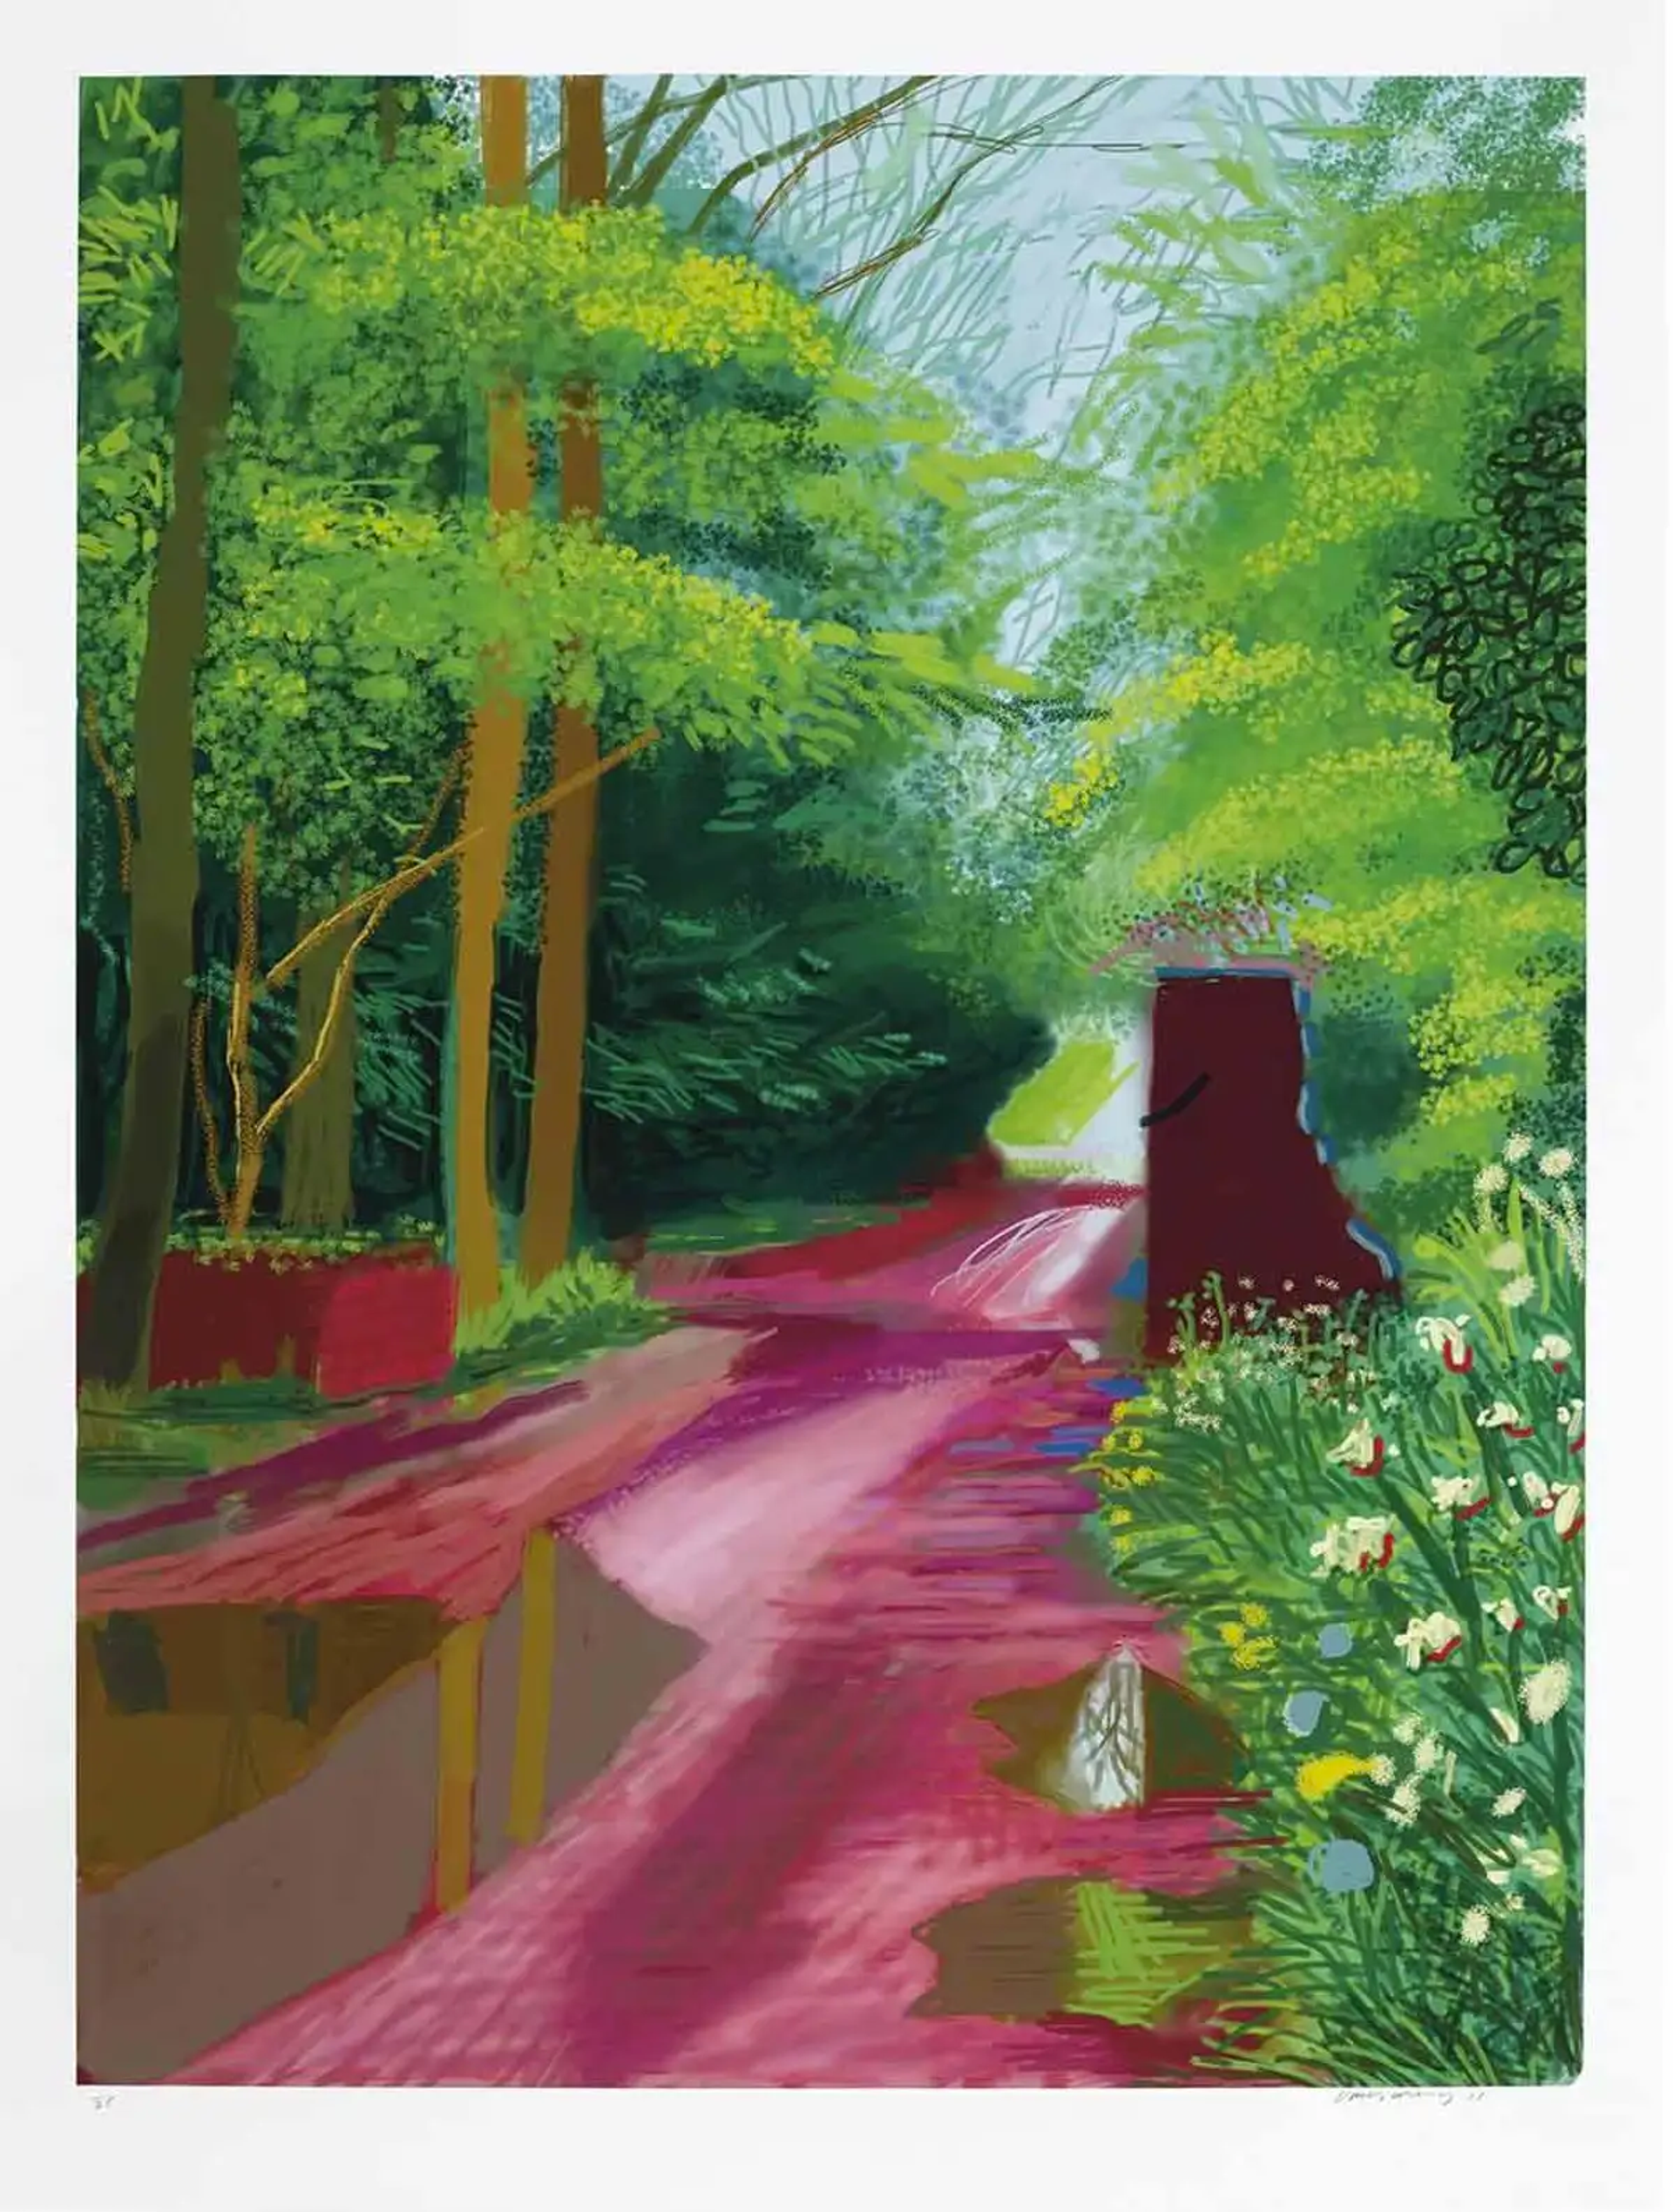 David Hockney’s The Arrival Of Spring In Woldgate East Yorkshire 11th May 2011. A digital print of an outdoor landscape with tall trees, flowers and ground that is multiple shades of pink.